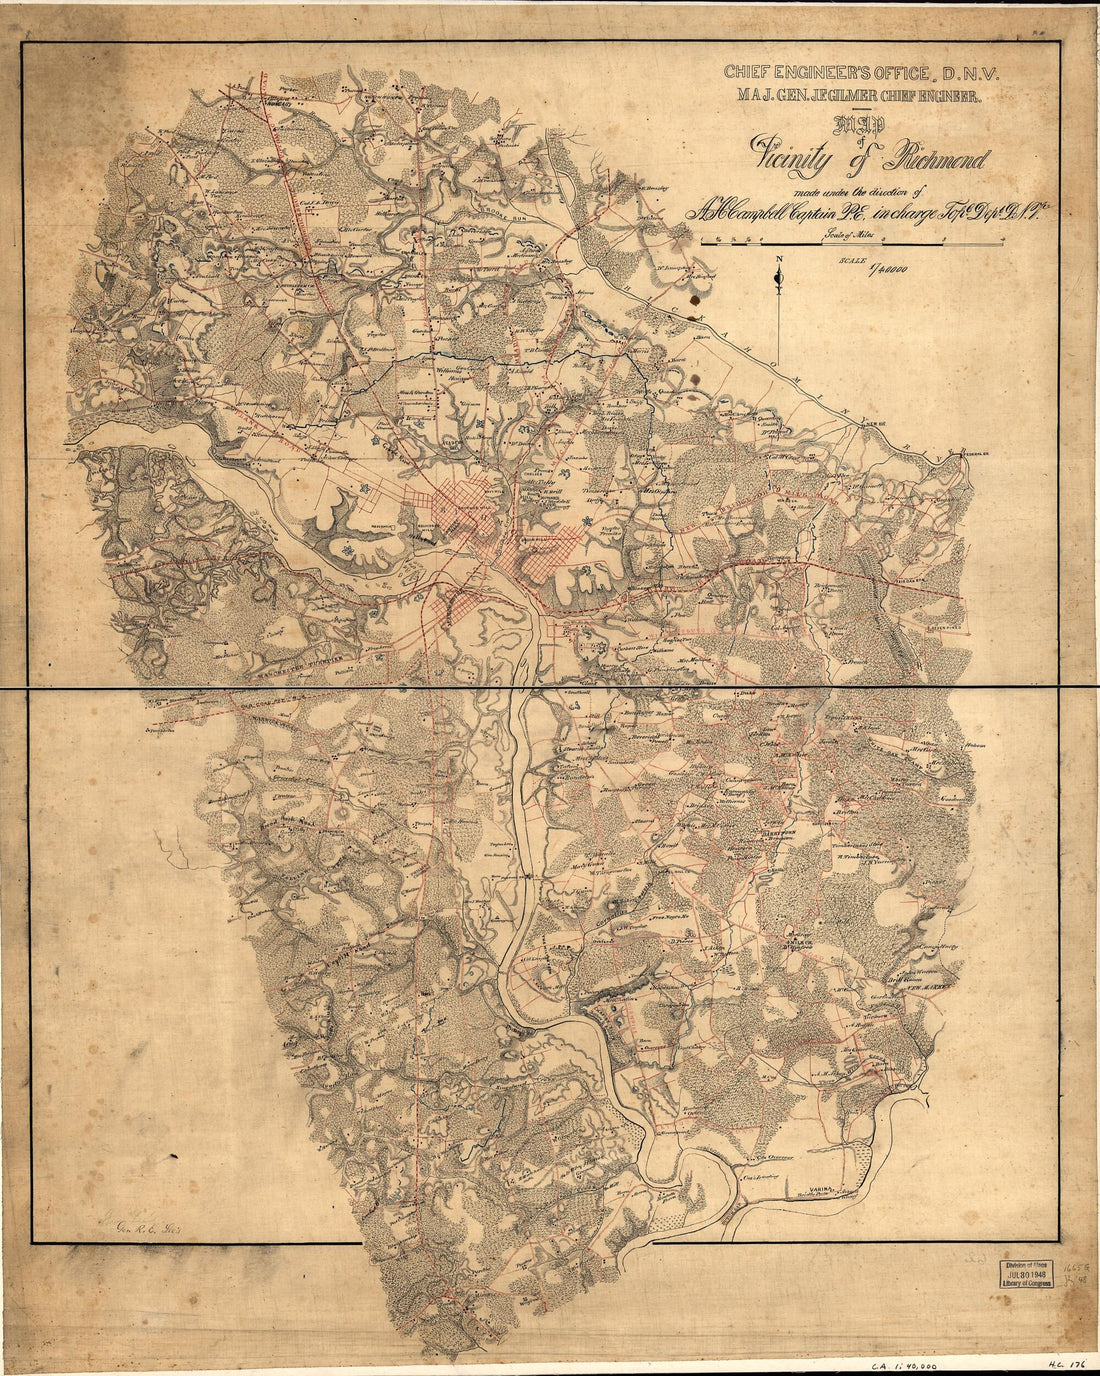 This old map of Map of Vicinity of Richmond from 1864 was created by Albert H. (Albert Henry) Campbell, Jeremy Francis Gilmer in 1864